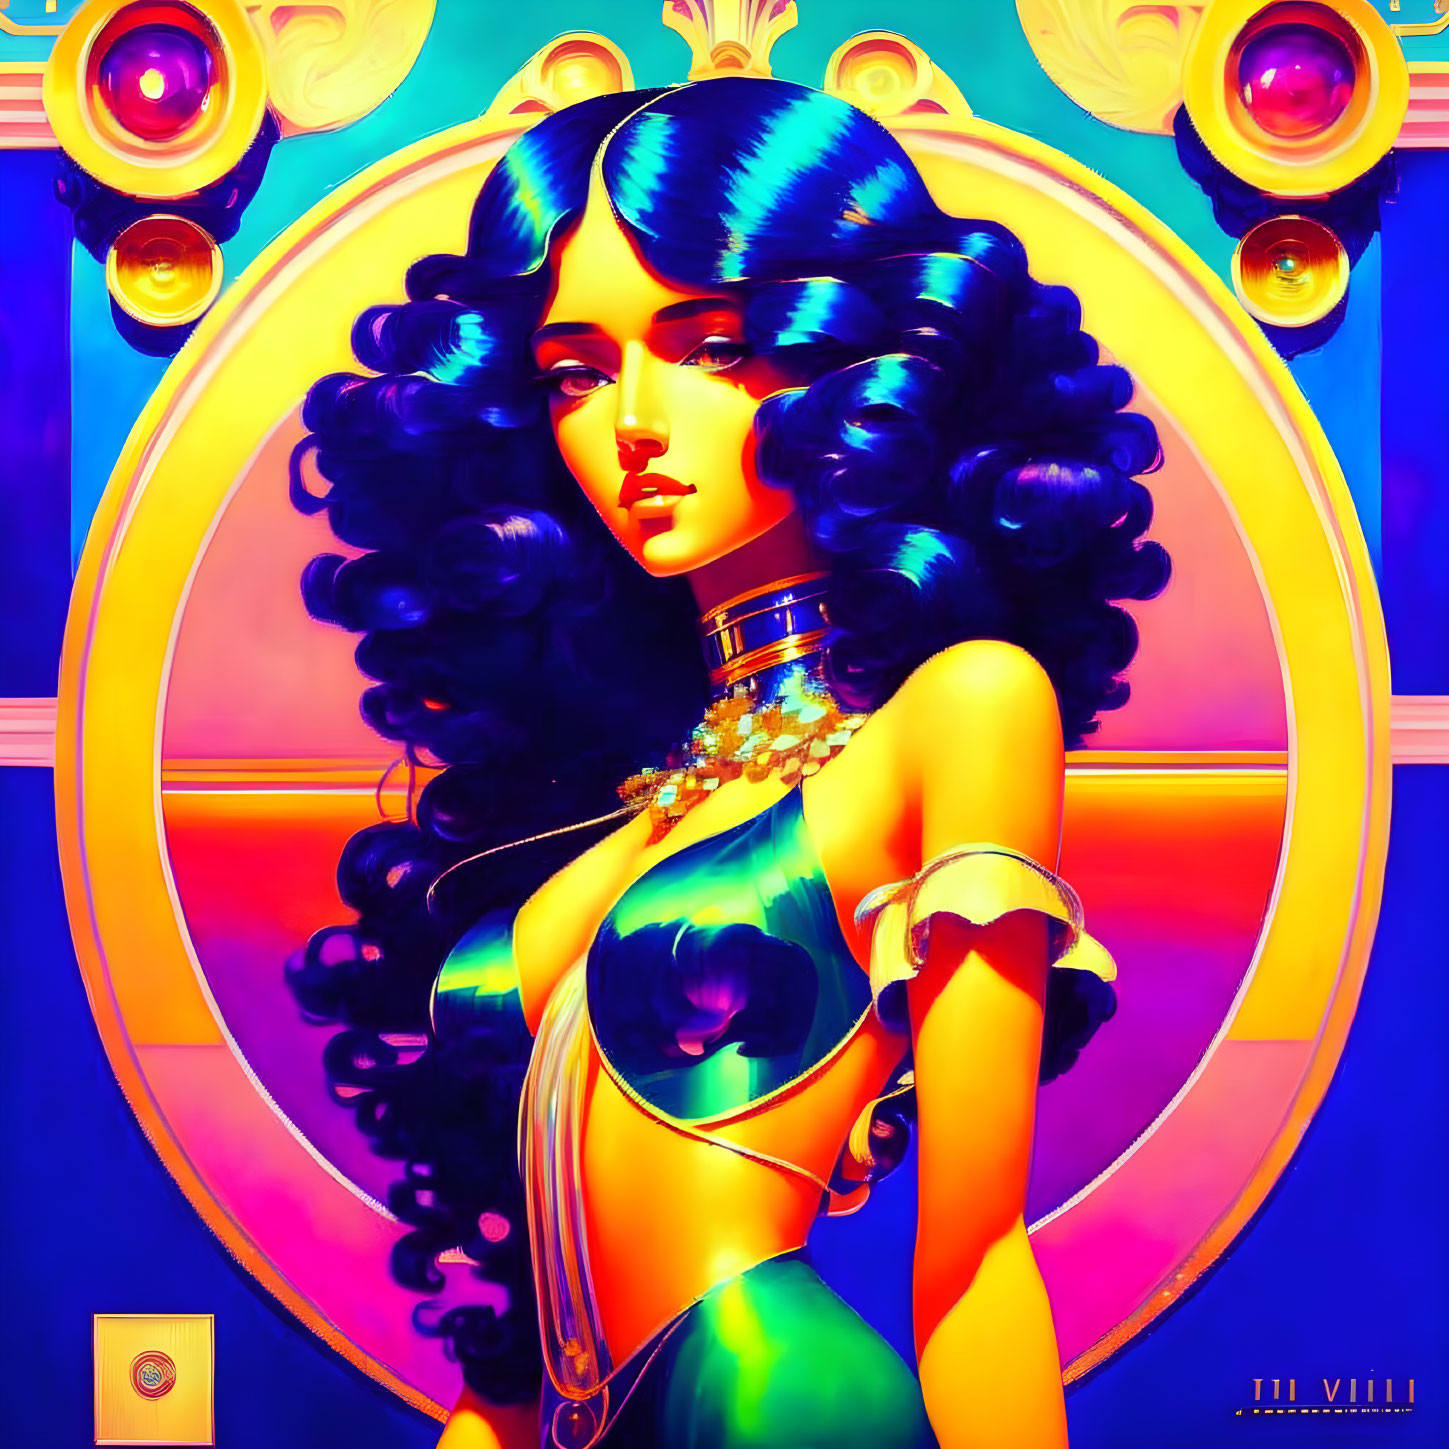 Colorful digital artwork of a woman with blue hair in celestial and art deco theme